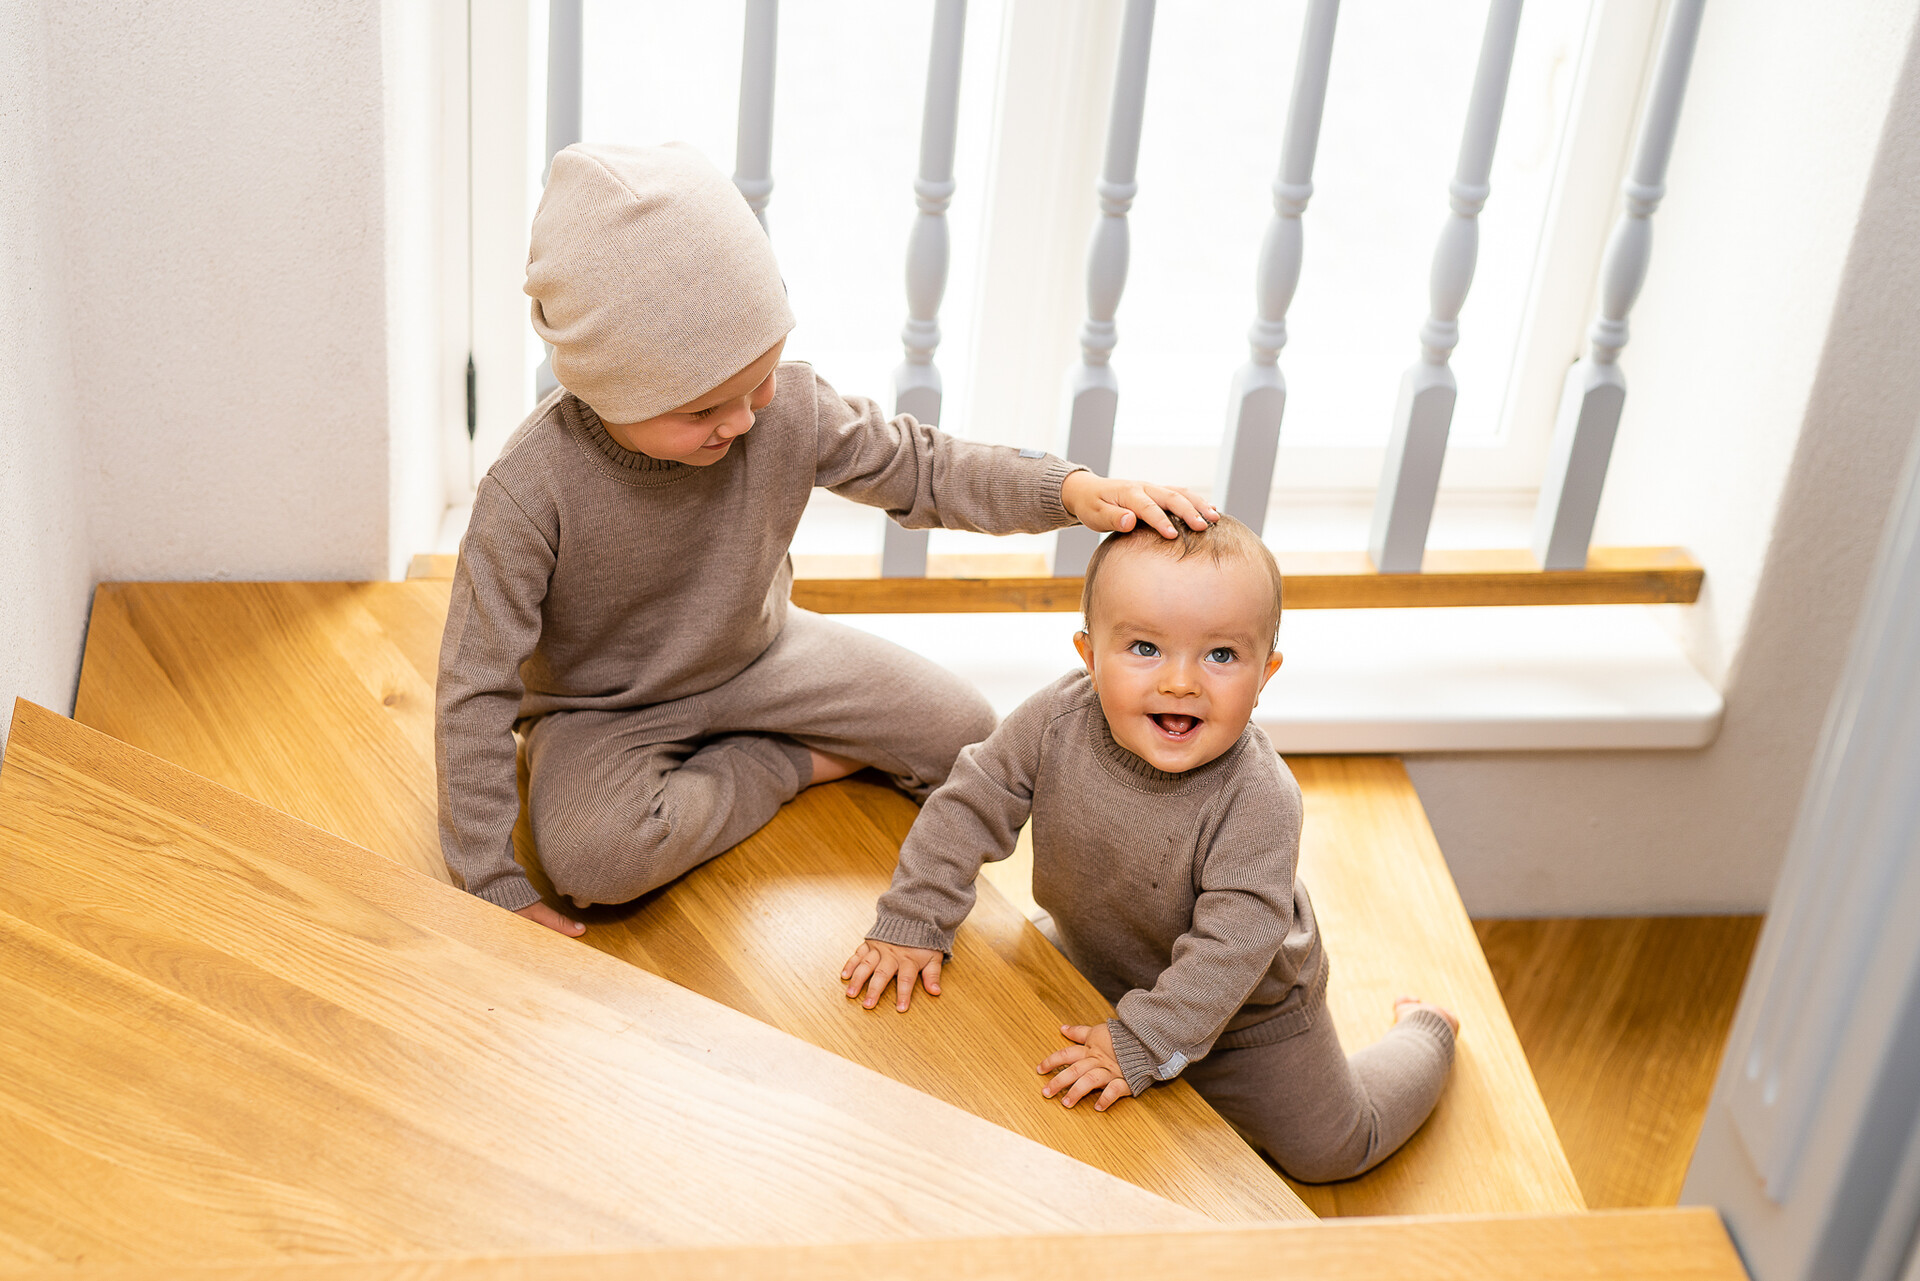 Light and comfortable fine knit leggings for babies and children. Comfortable to wear in every season, from winter to summer.  